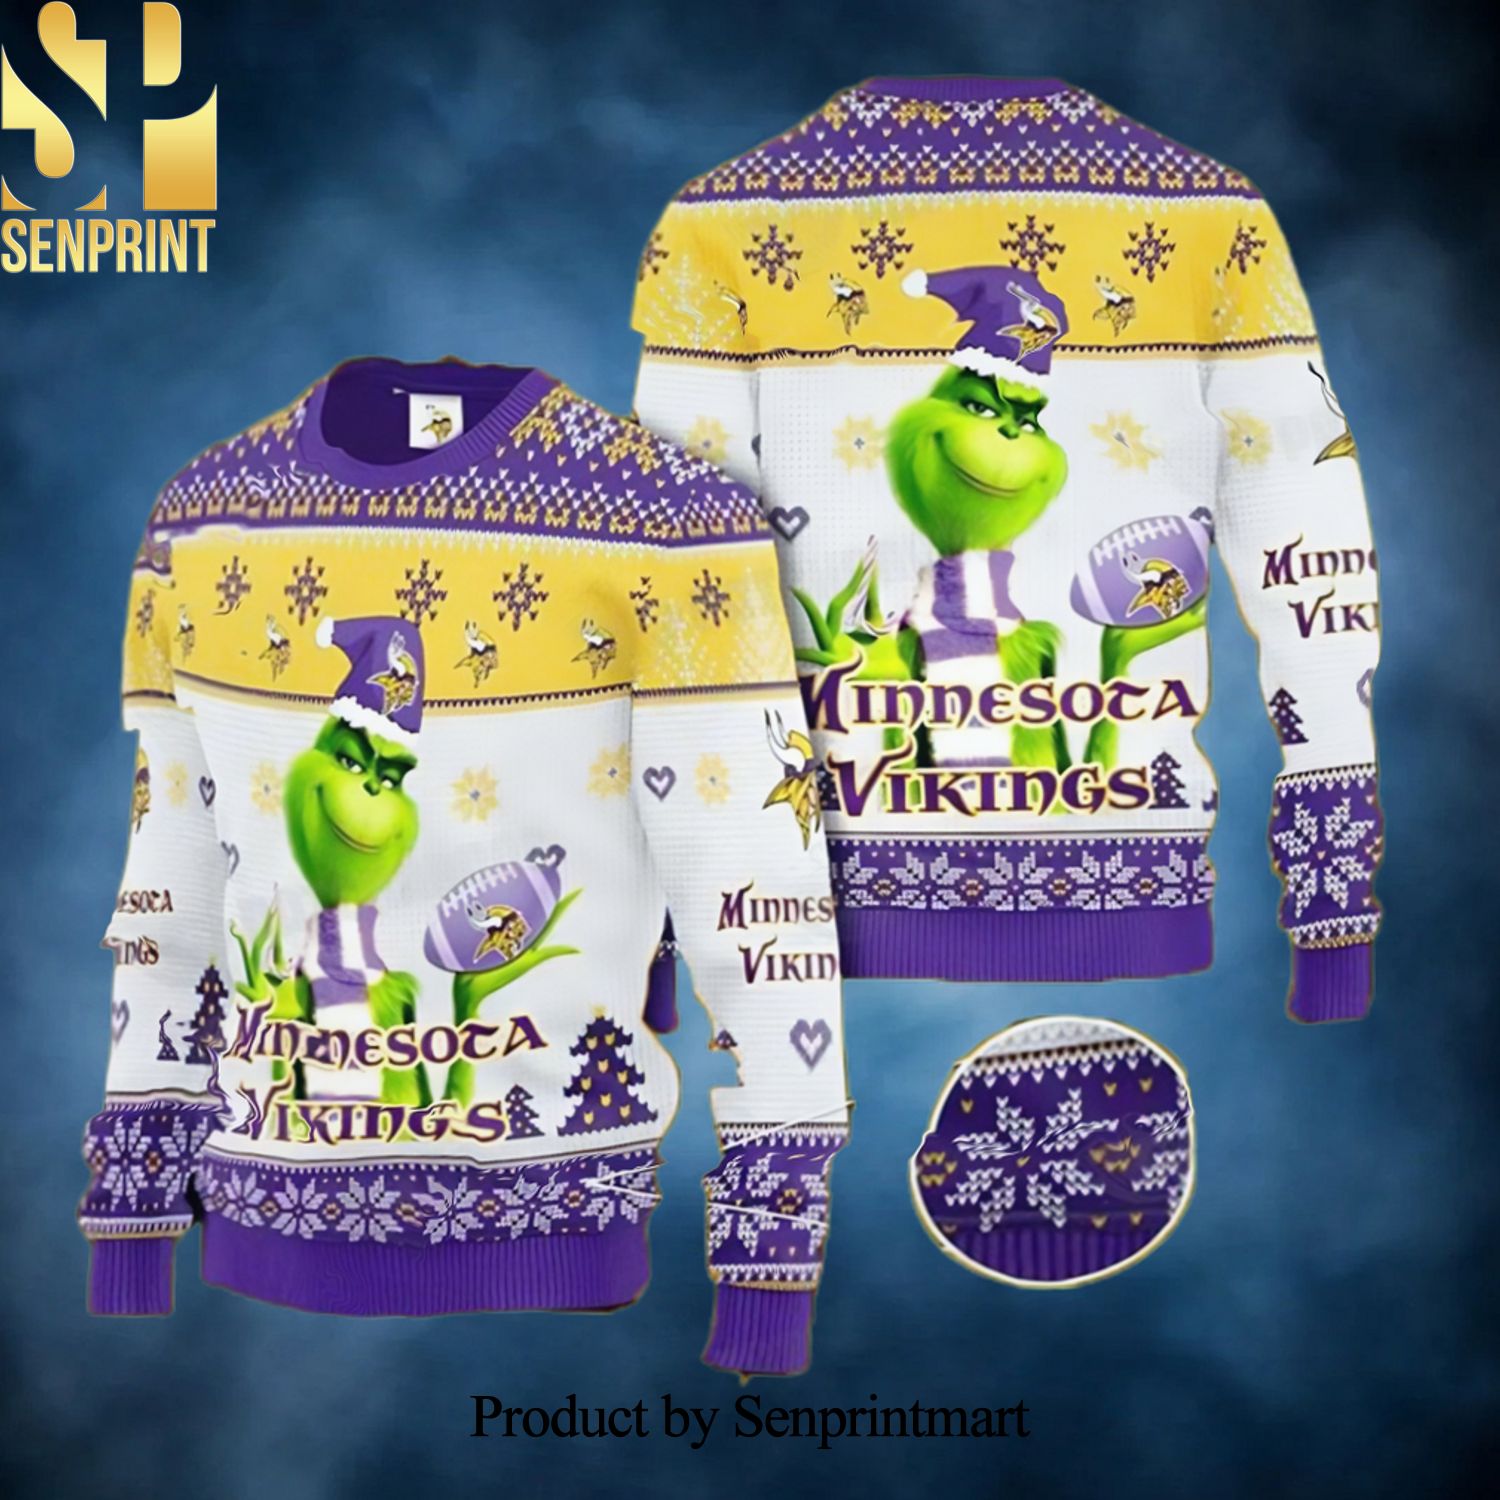 Grinch Knit Minnesota Vikings Gift Christmas Wool Knitted 3D Sweater